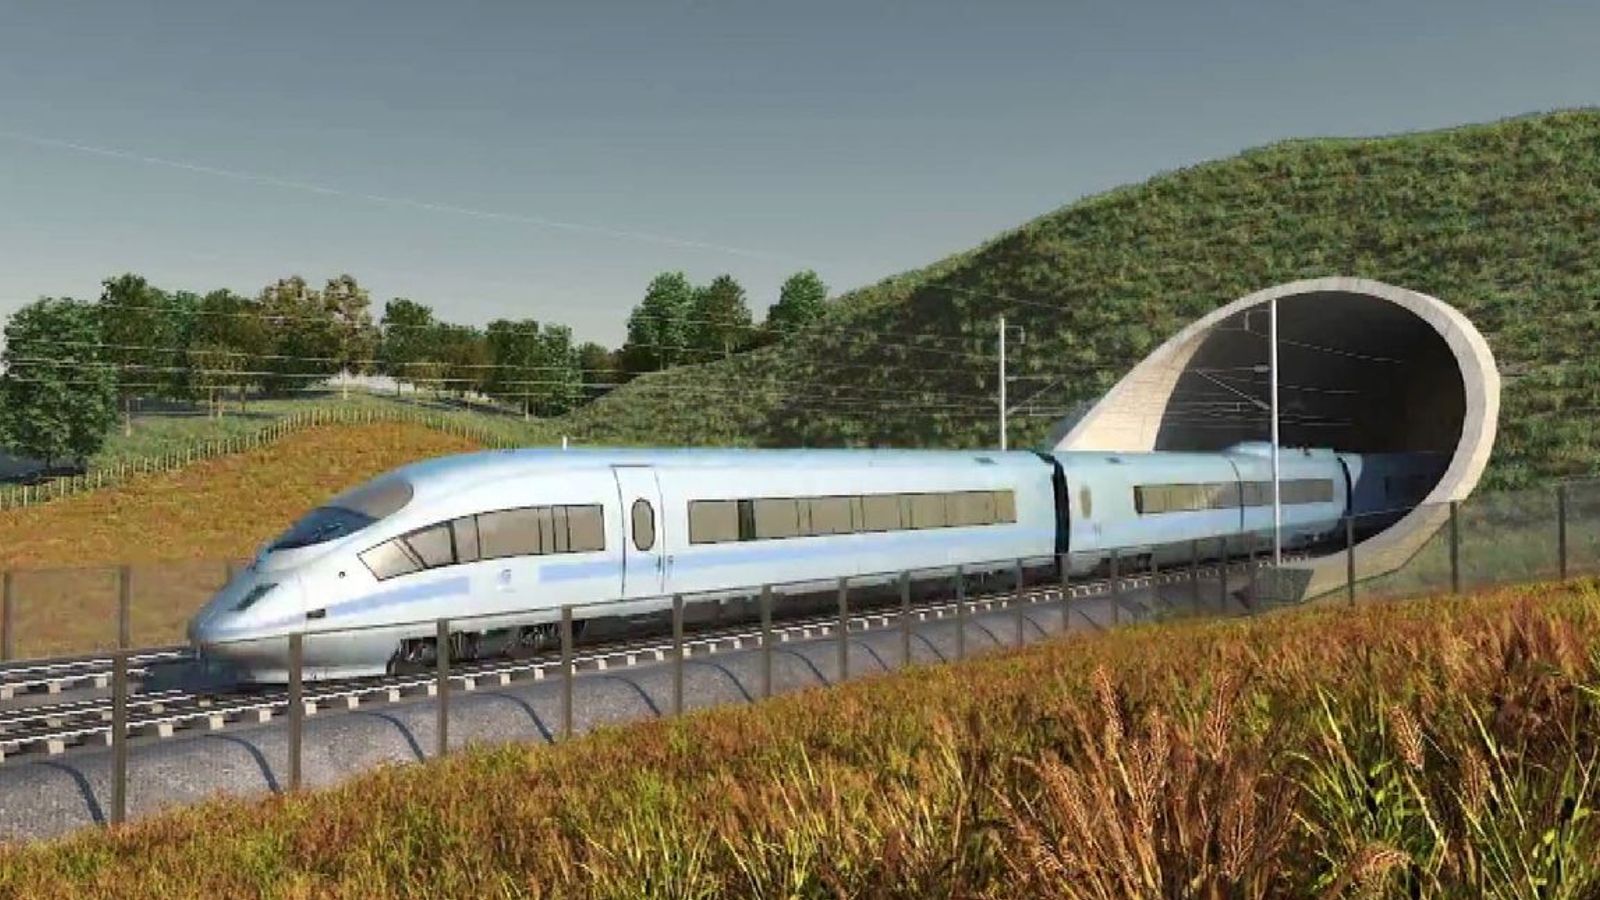 Reports HS2 services will be halved - and run at lower speeds - dismissed as 'speculation' by govt